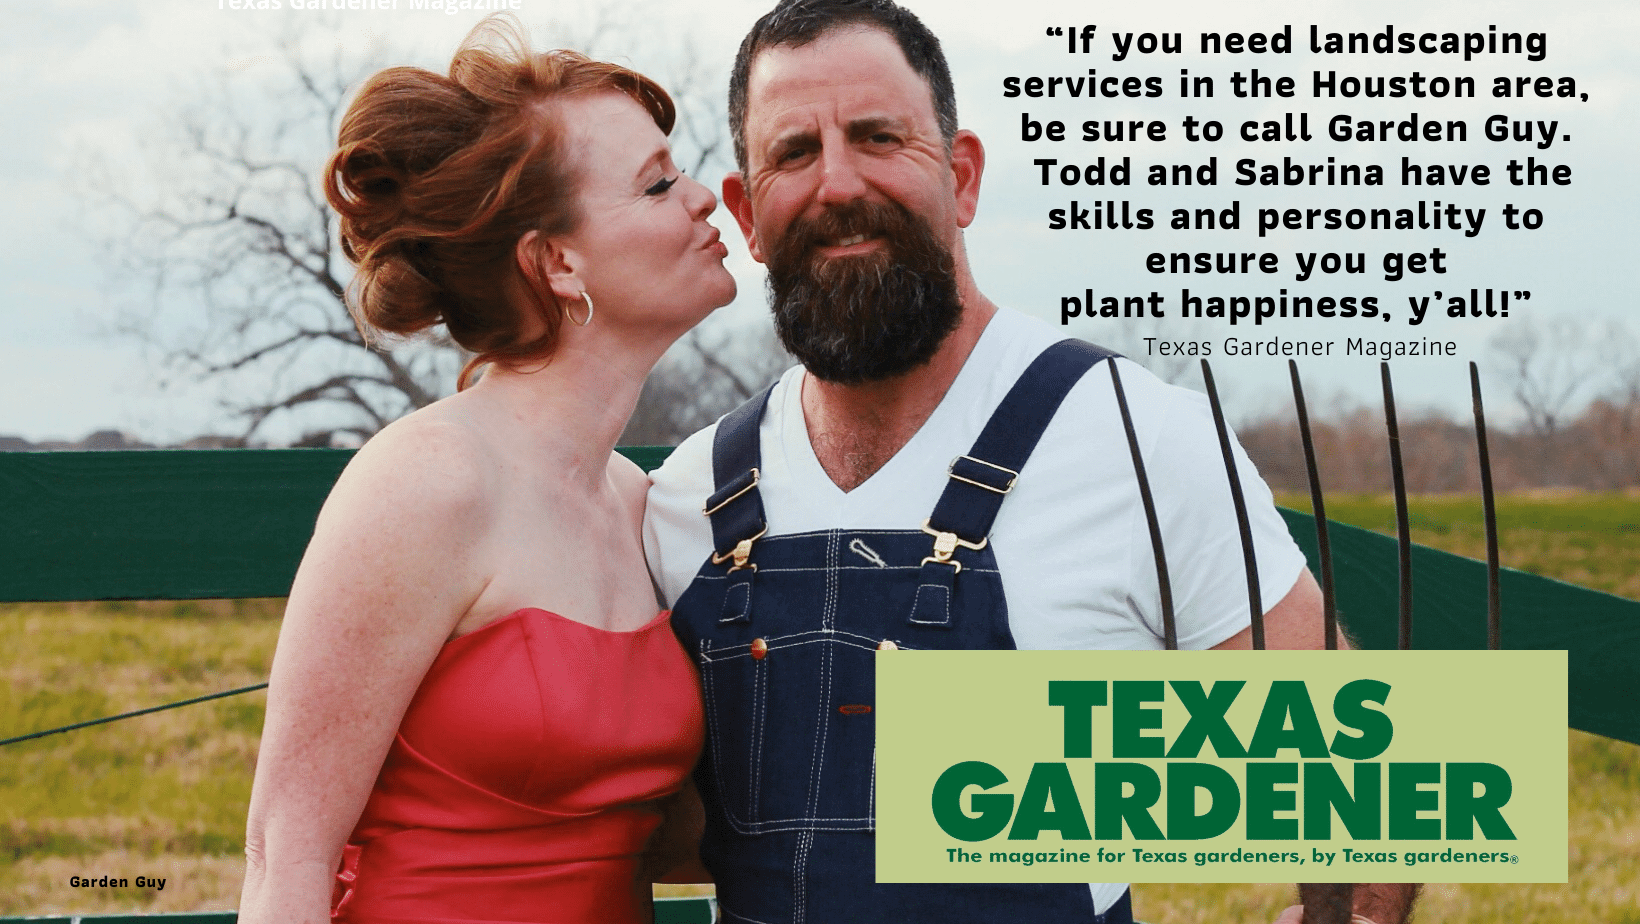 Texas Gardener Magazine declares, If you need landscaping services in the Houston area, use Garden Guy Todd Farber. 